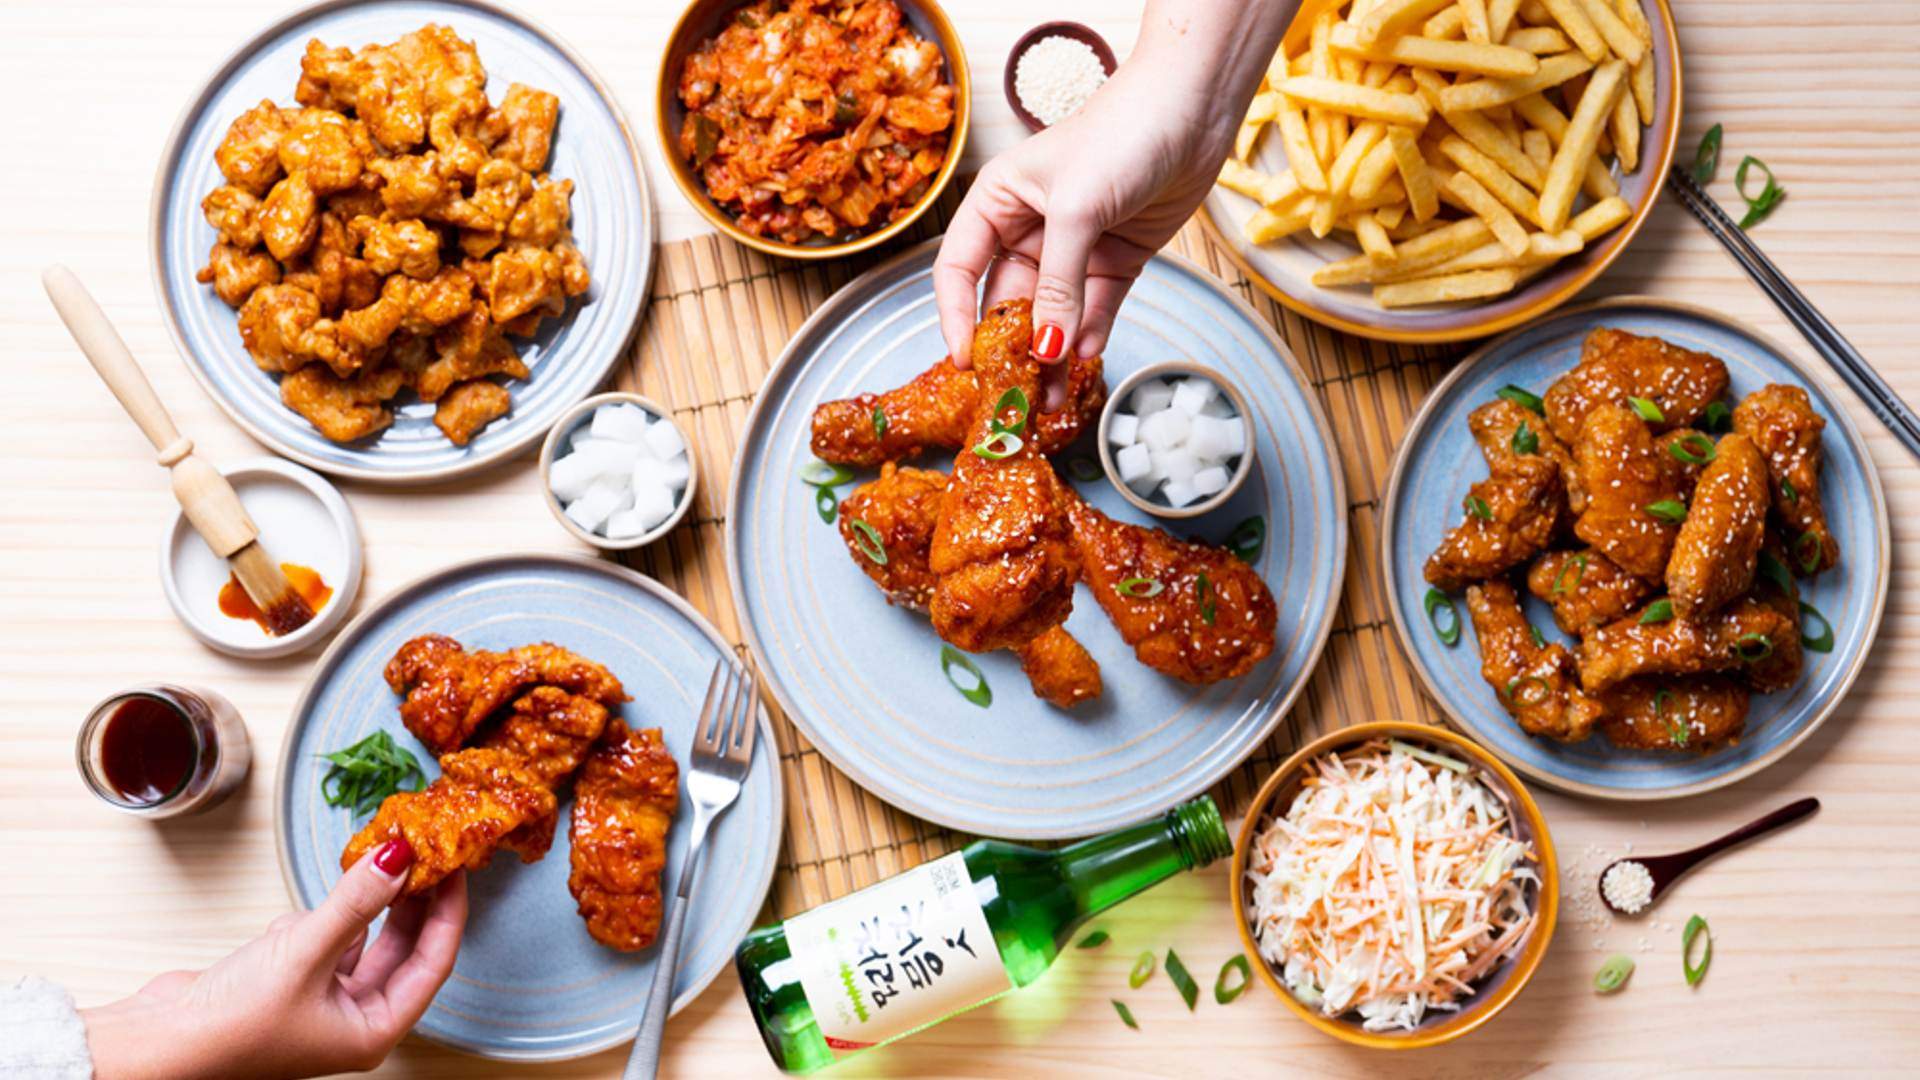 Korean-Born Fried Chicken Favourite Bonchon Has Opened Its First Australian Store in Melbourne